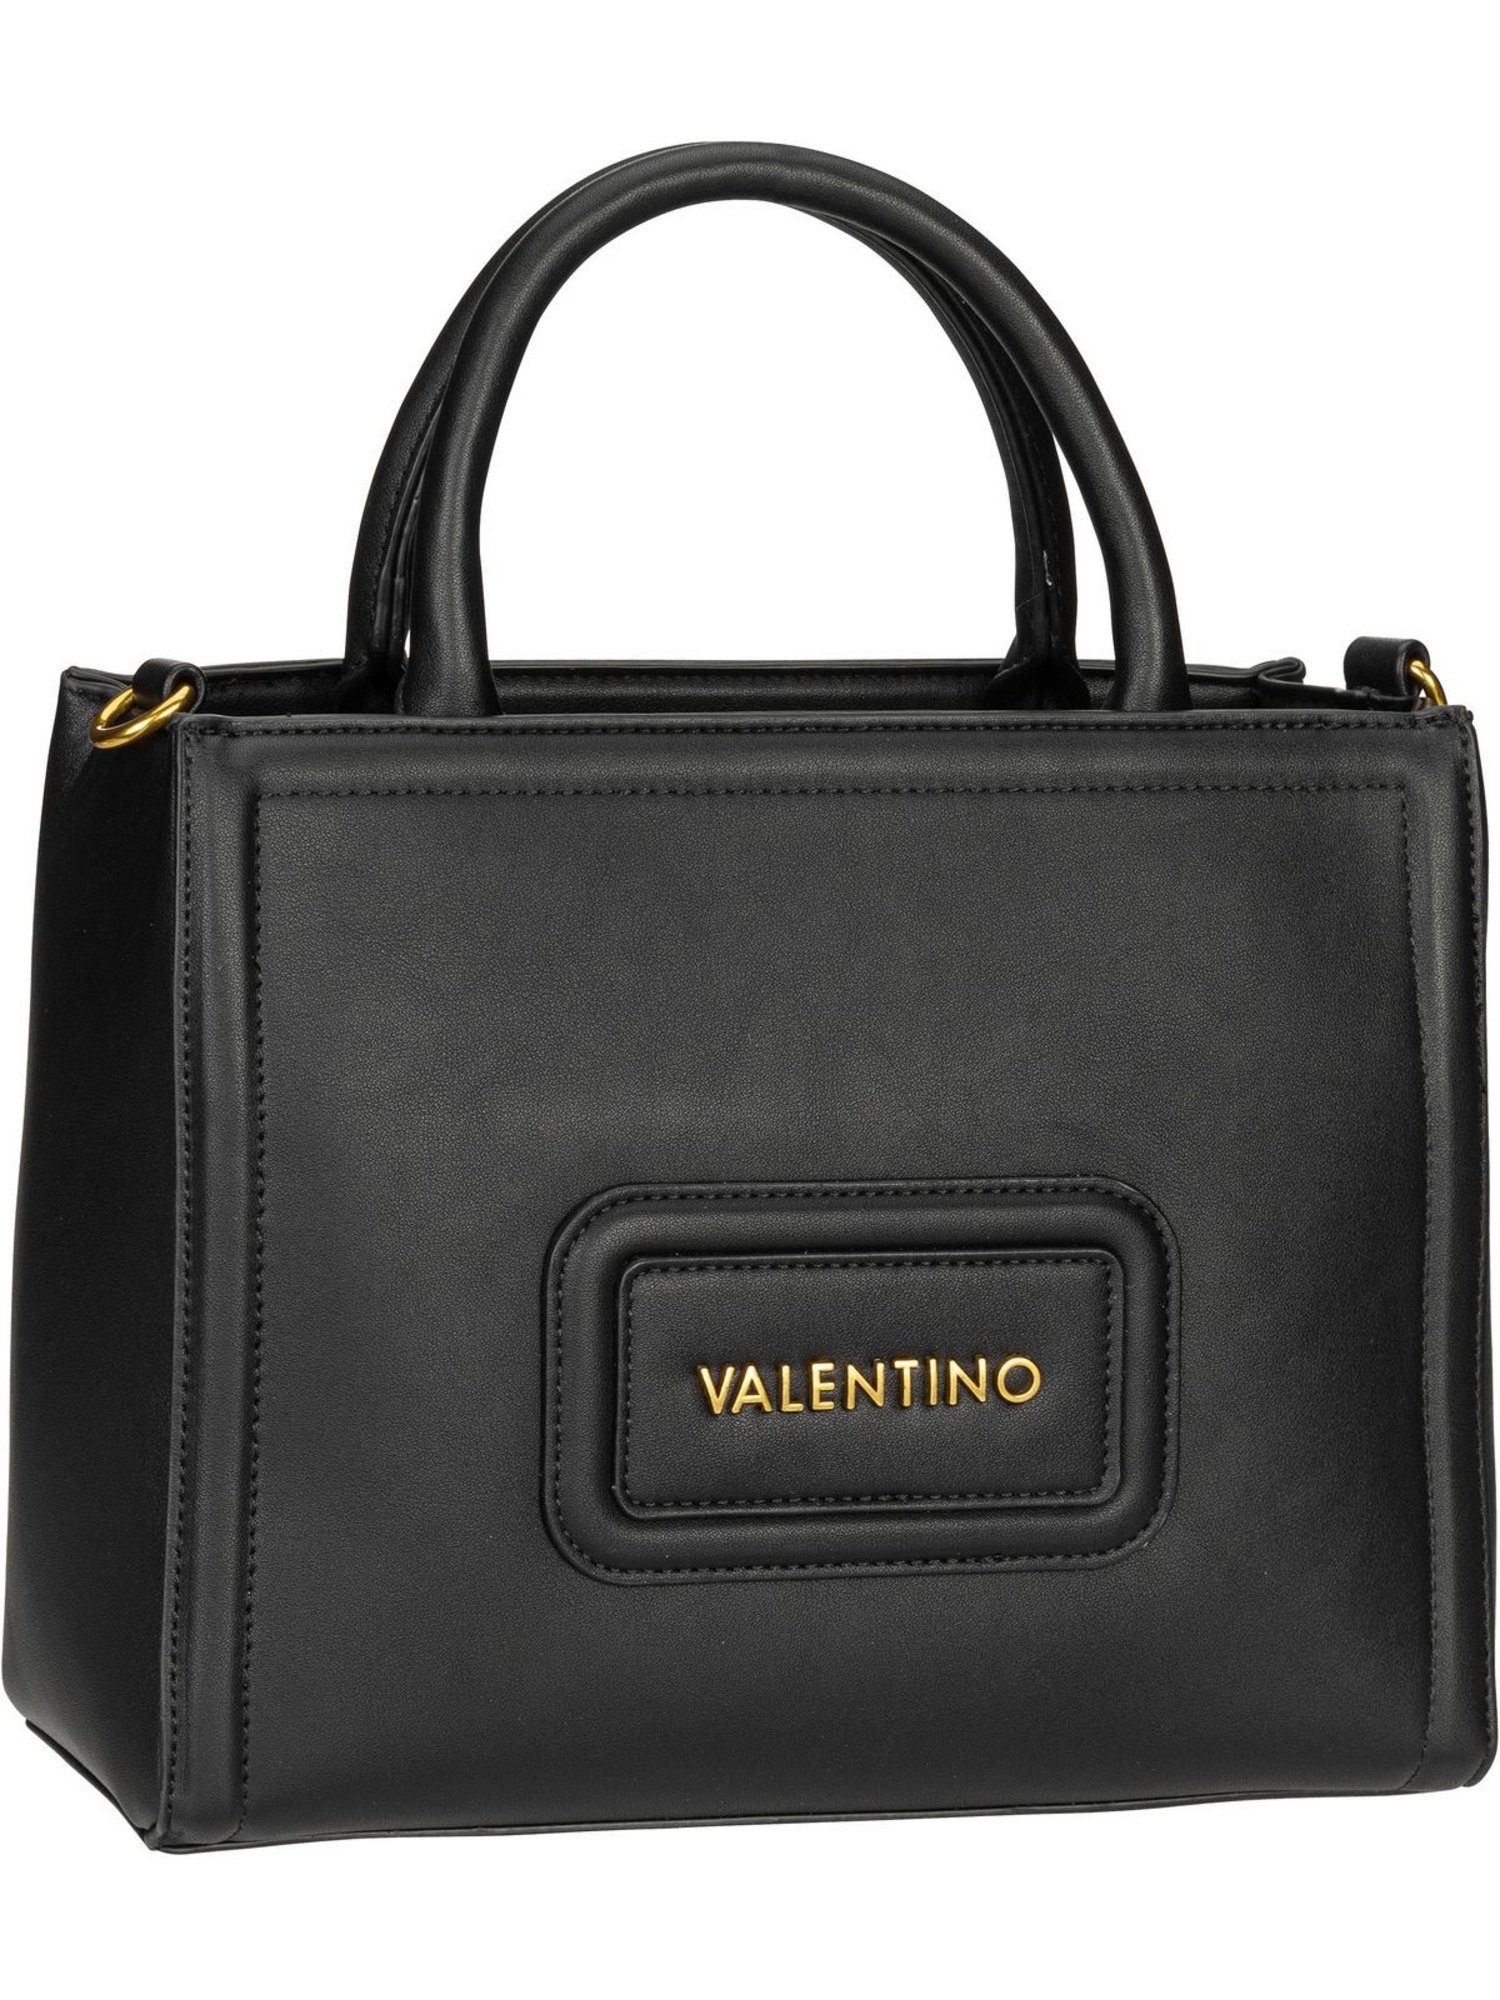 VALENTINO BAGS Handtasche Snowy RE Shopping M04, Tote Bag Nero